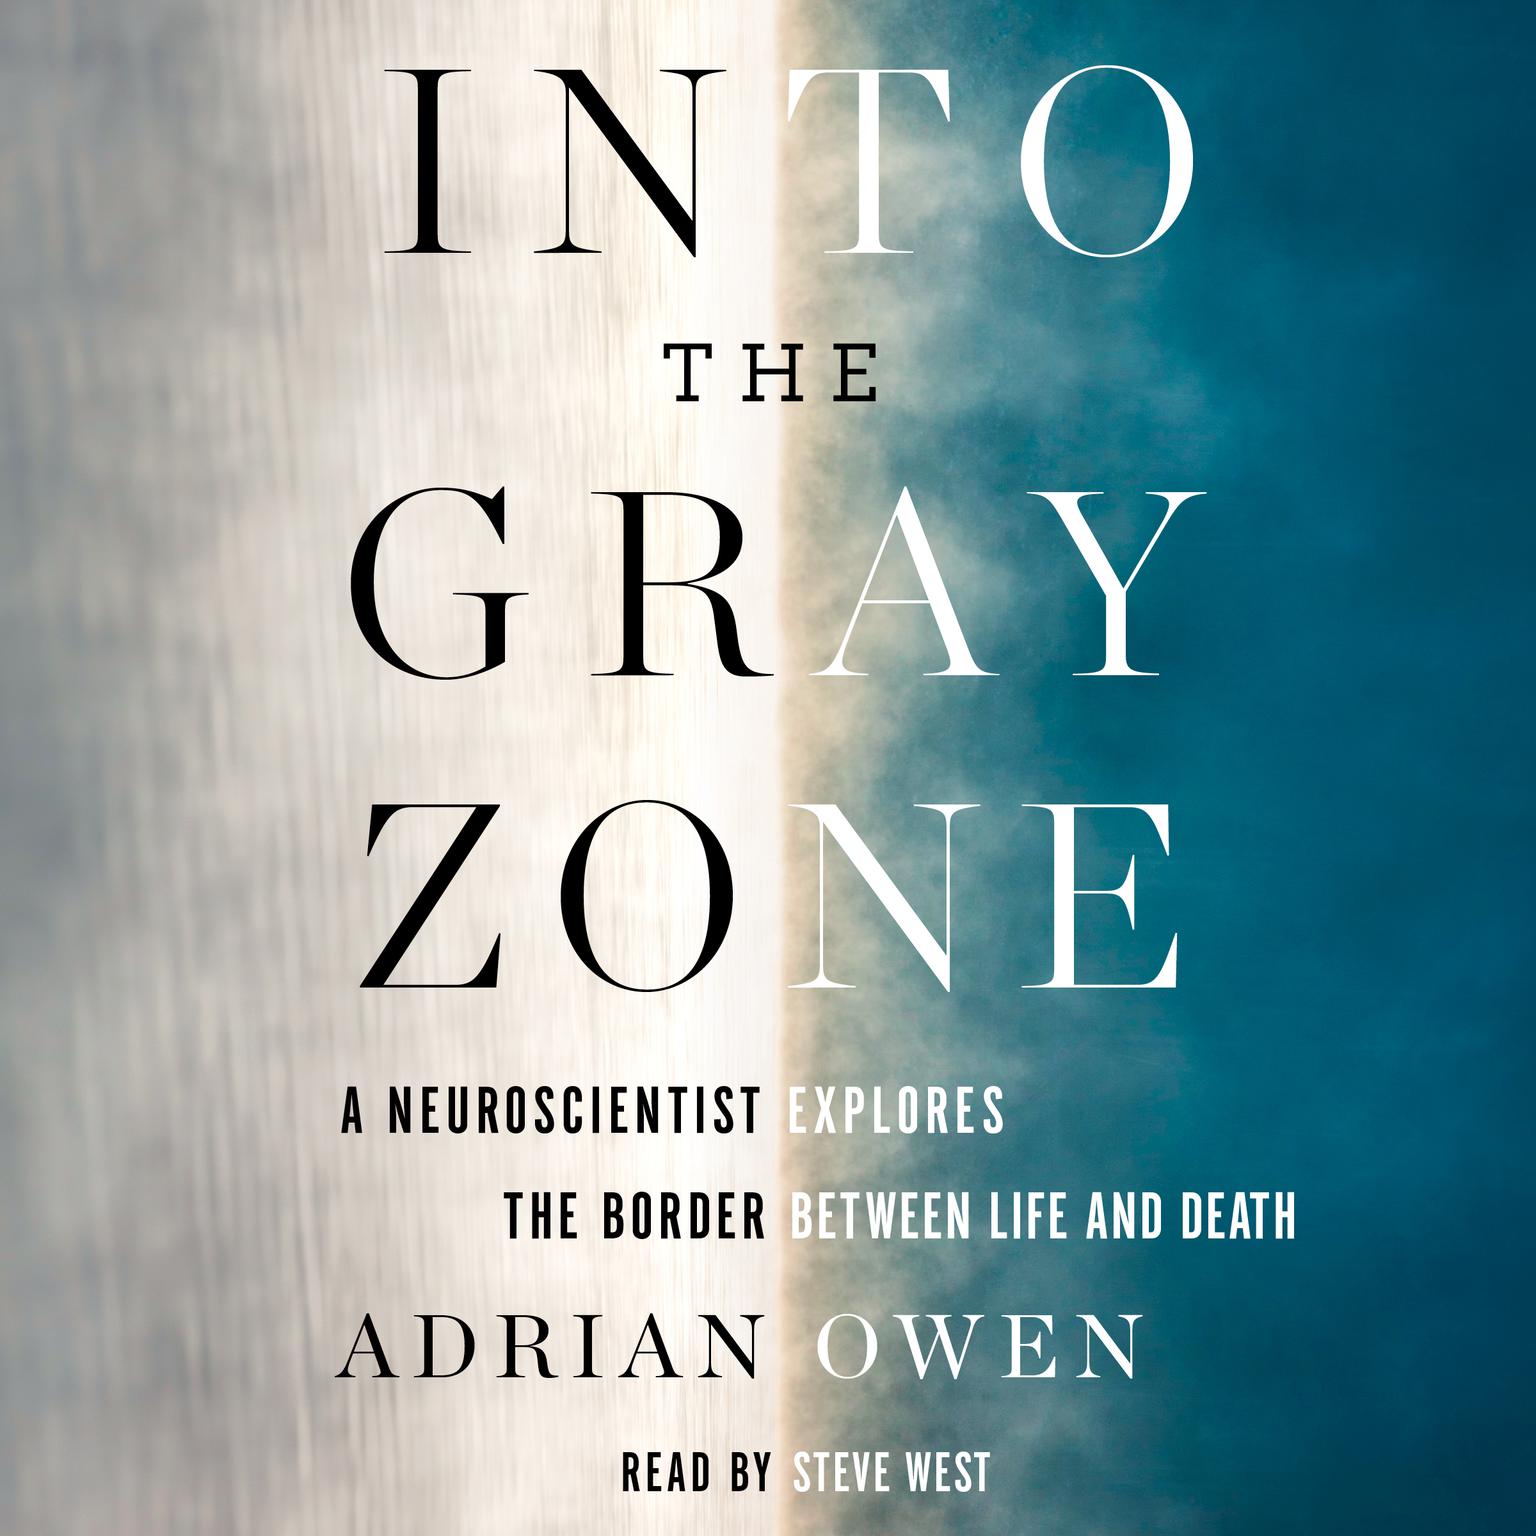 Into the Gray Zone: A Neuroscientist Explores the Border Between Life and Death Audiobook, by Adrian Owen